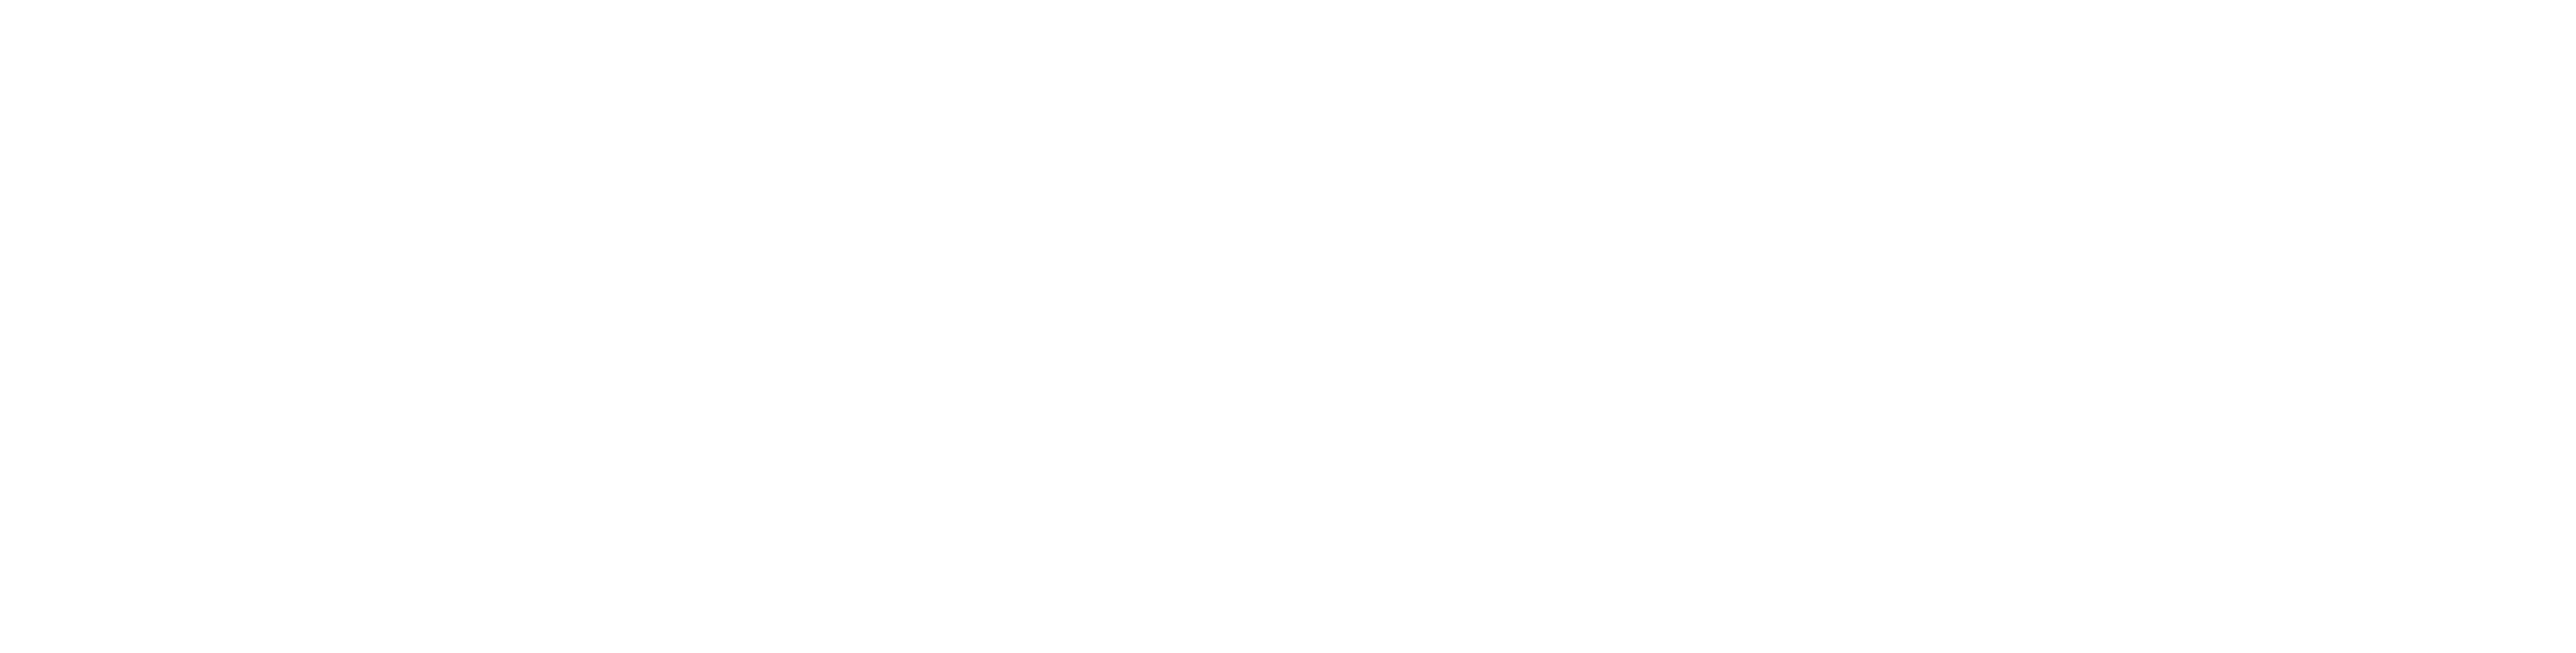 Gondal Group of Industries